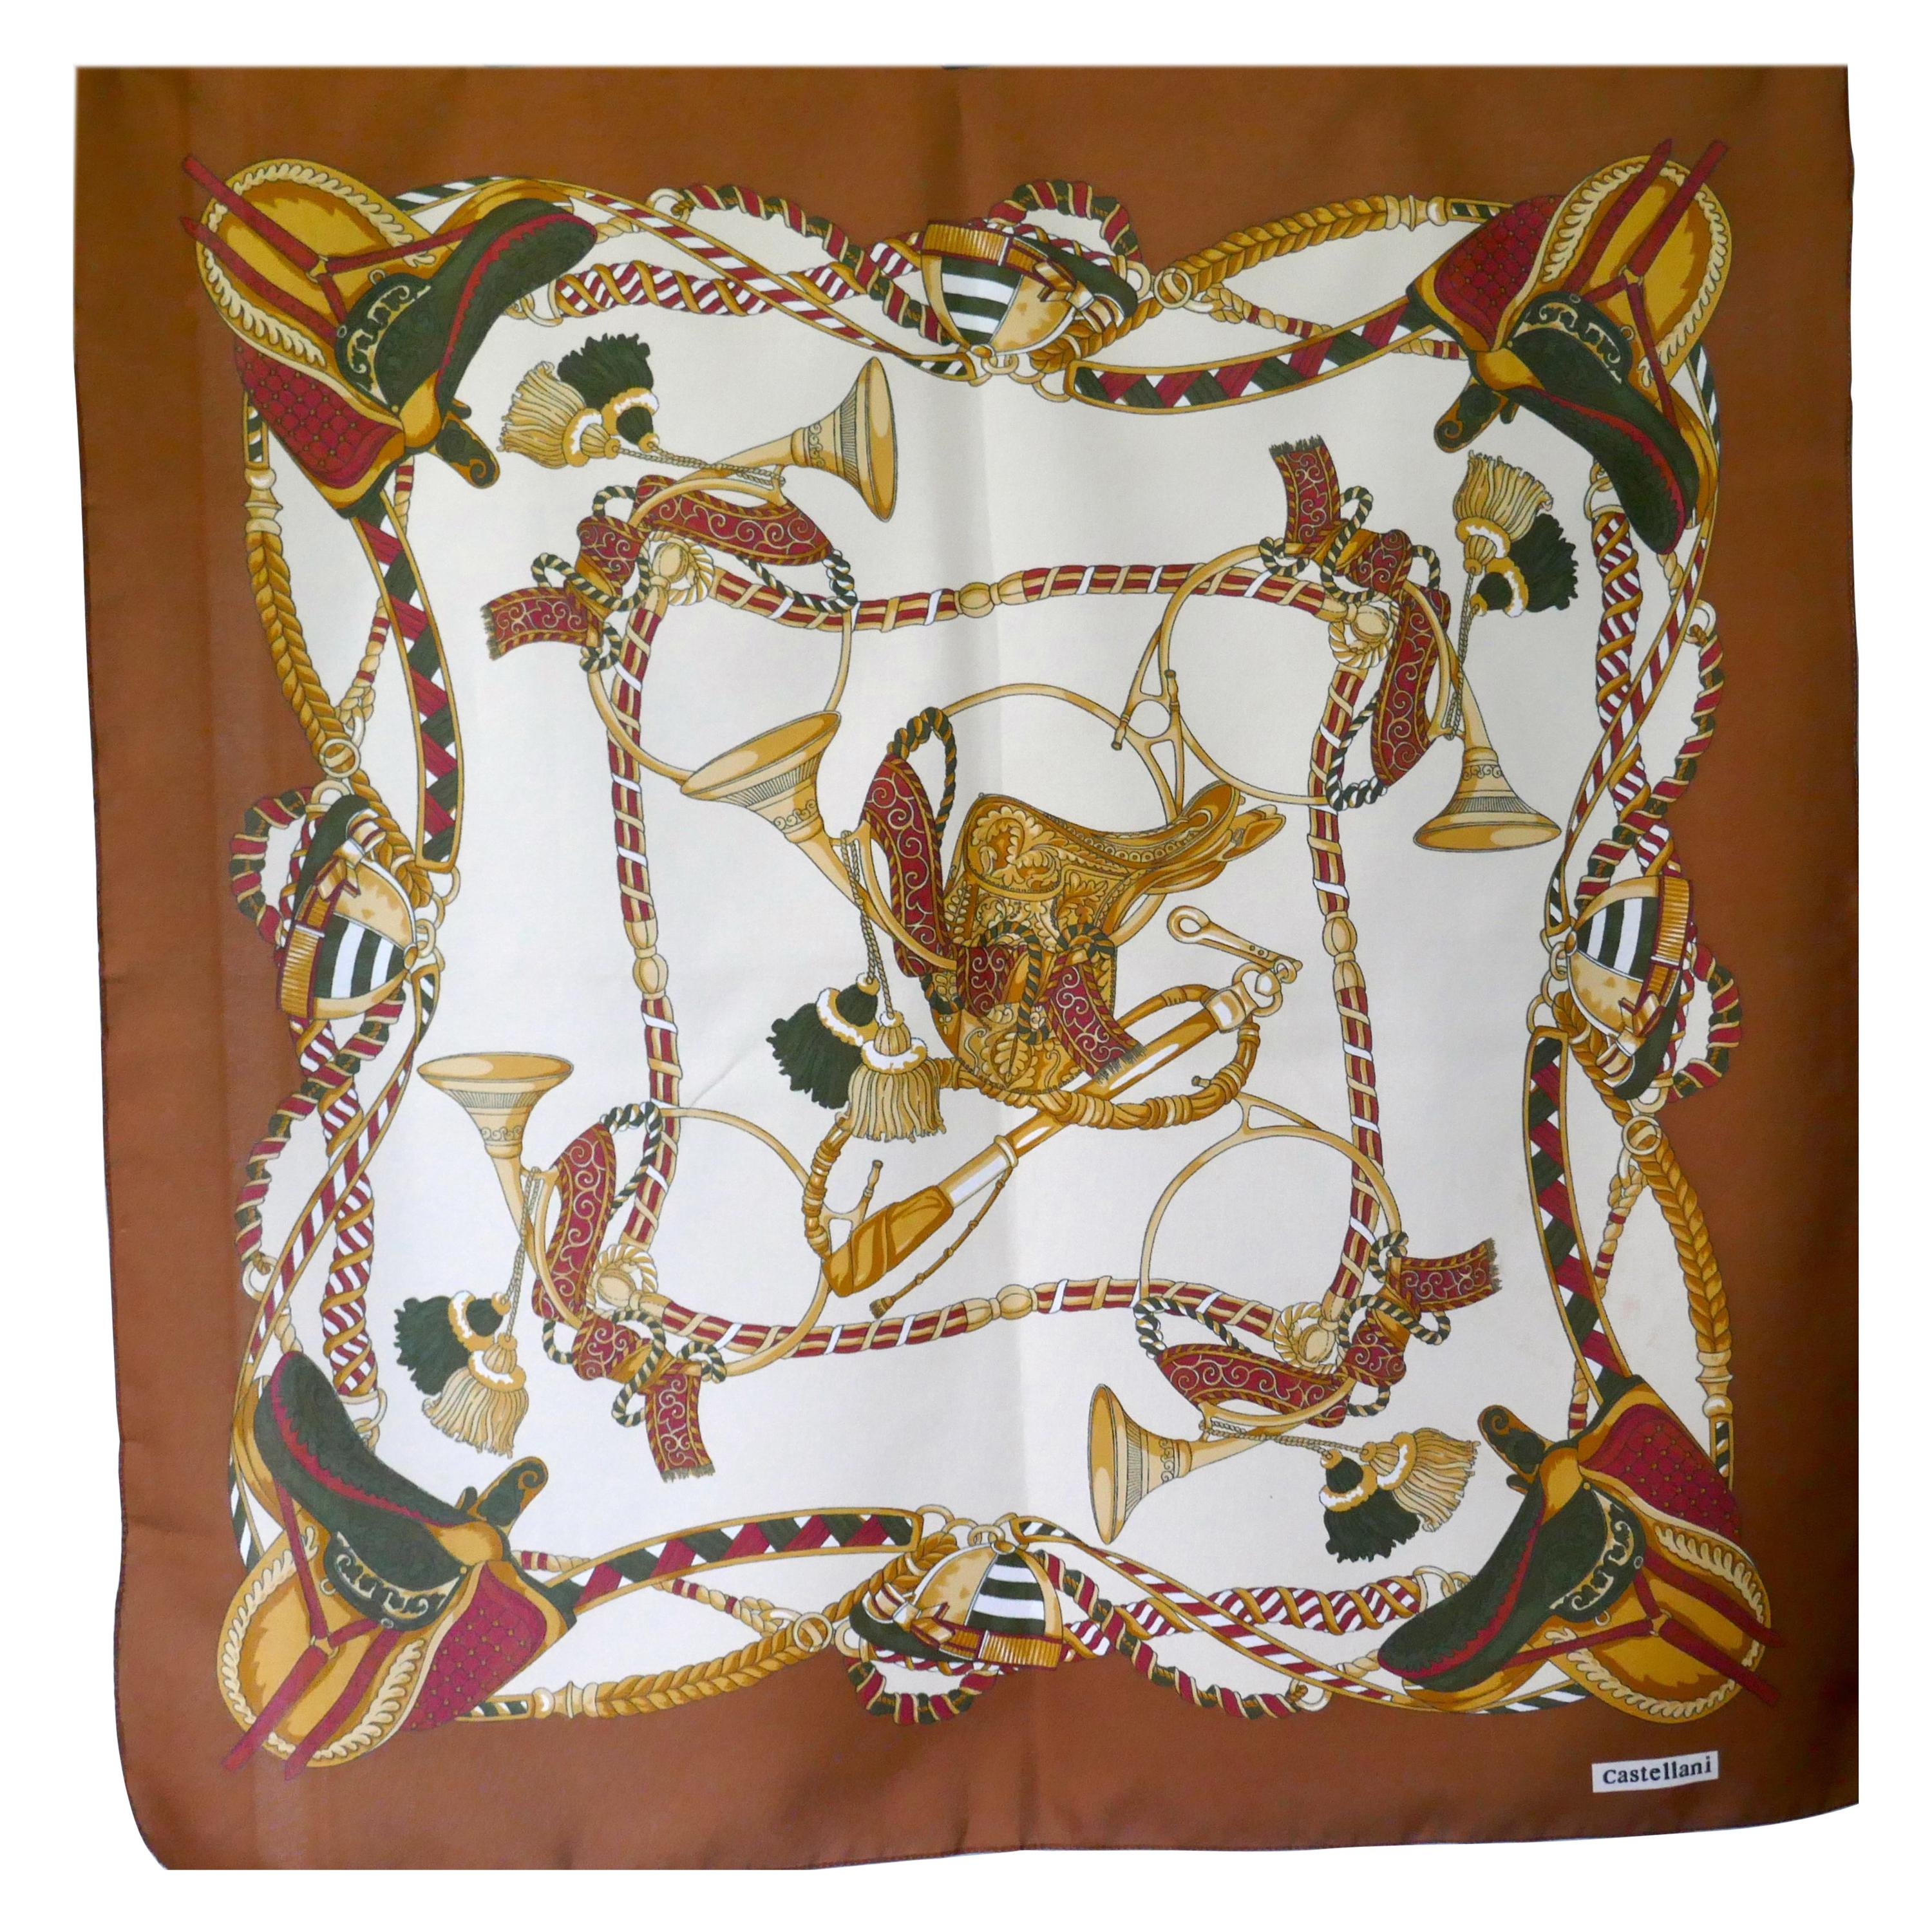  Vintage Scarf, Classic Equine Design by Castellani from the Italian Collection